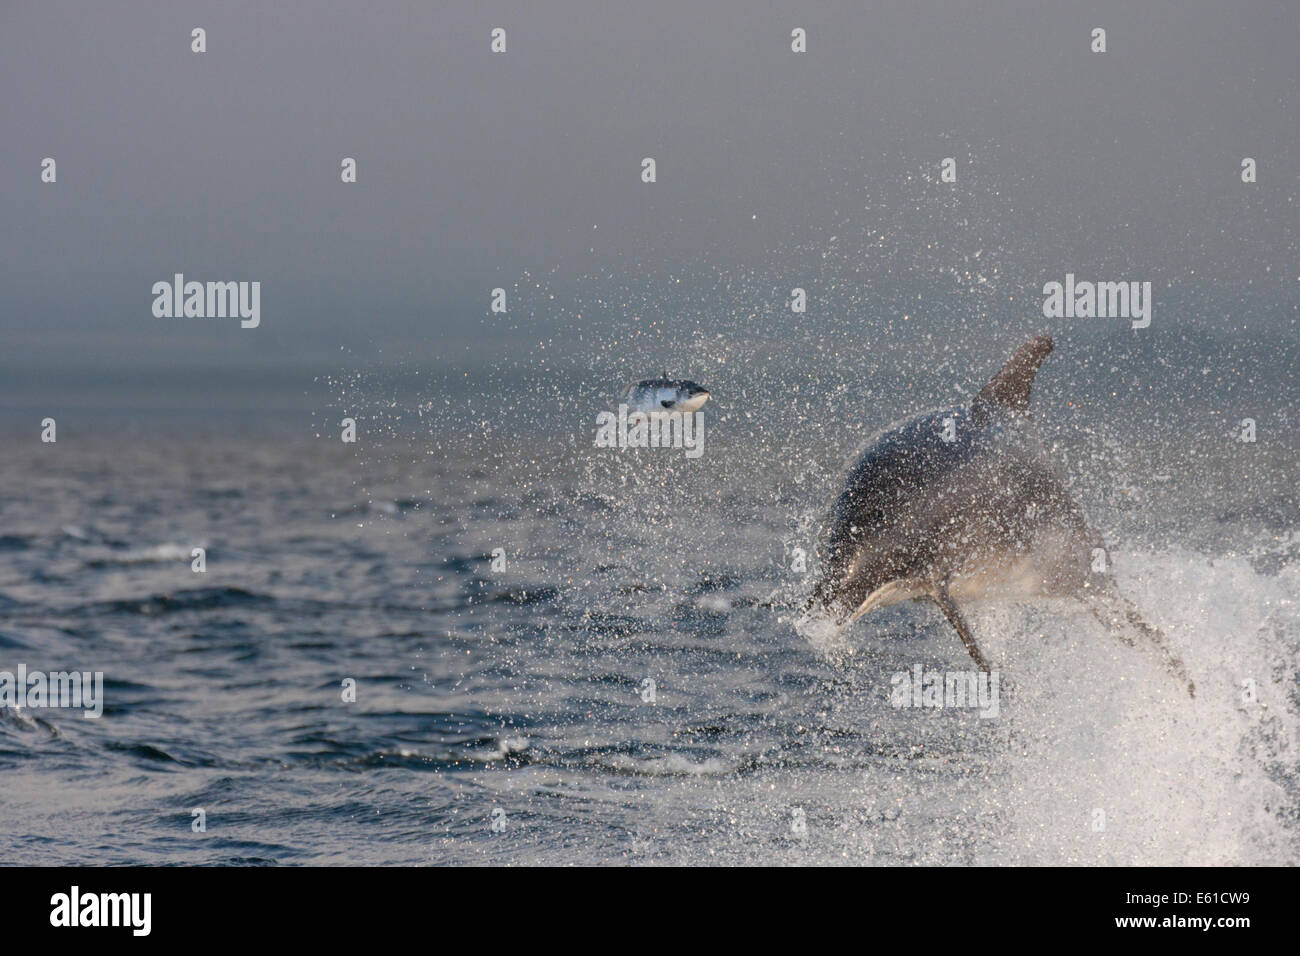 Bottlenose dolphin (Tursiops truncatus) catching a fish (salmon), Chanonry Point, Moray Firth, Highlands, Scotland, UK Stock Photo